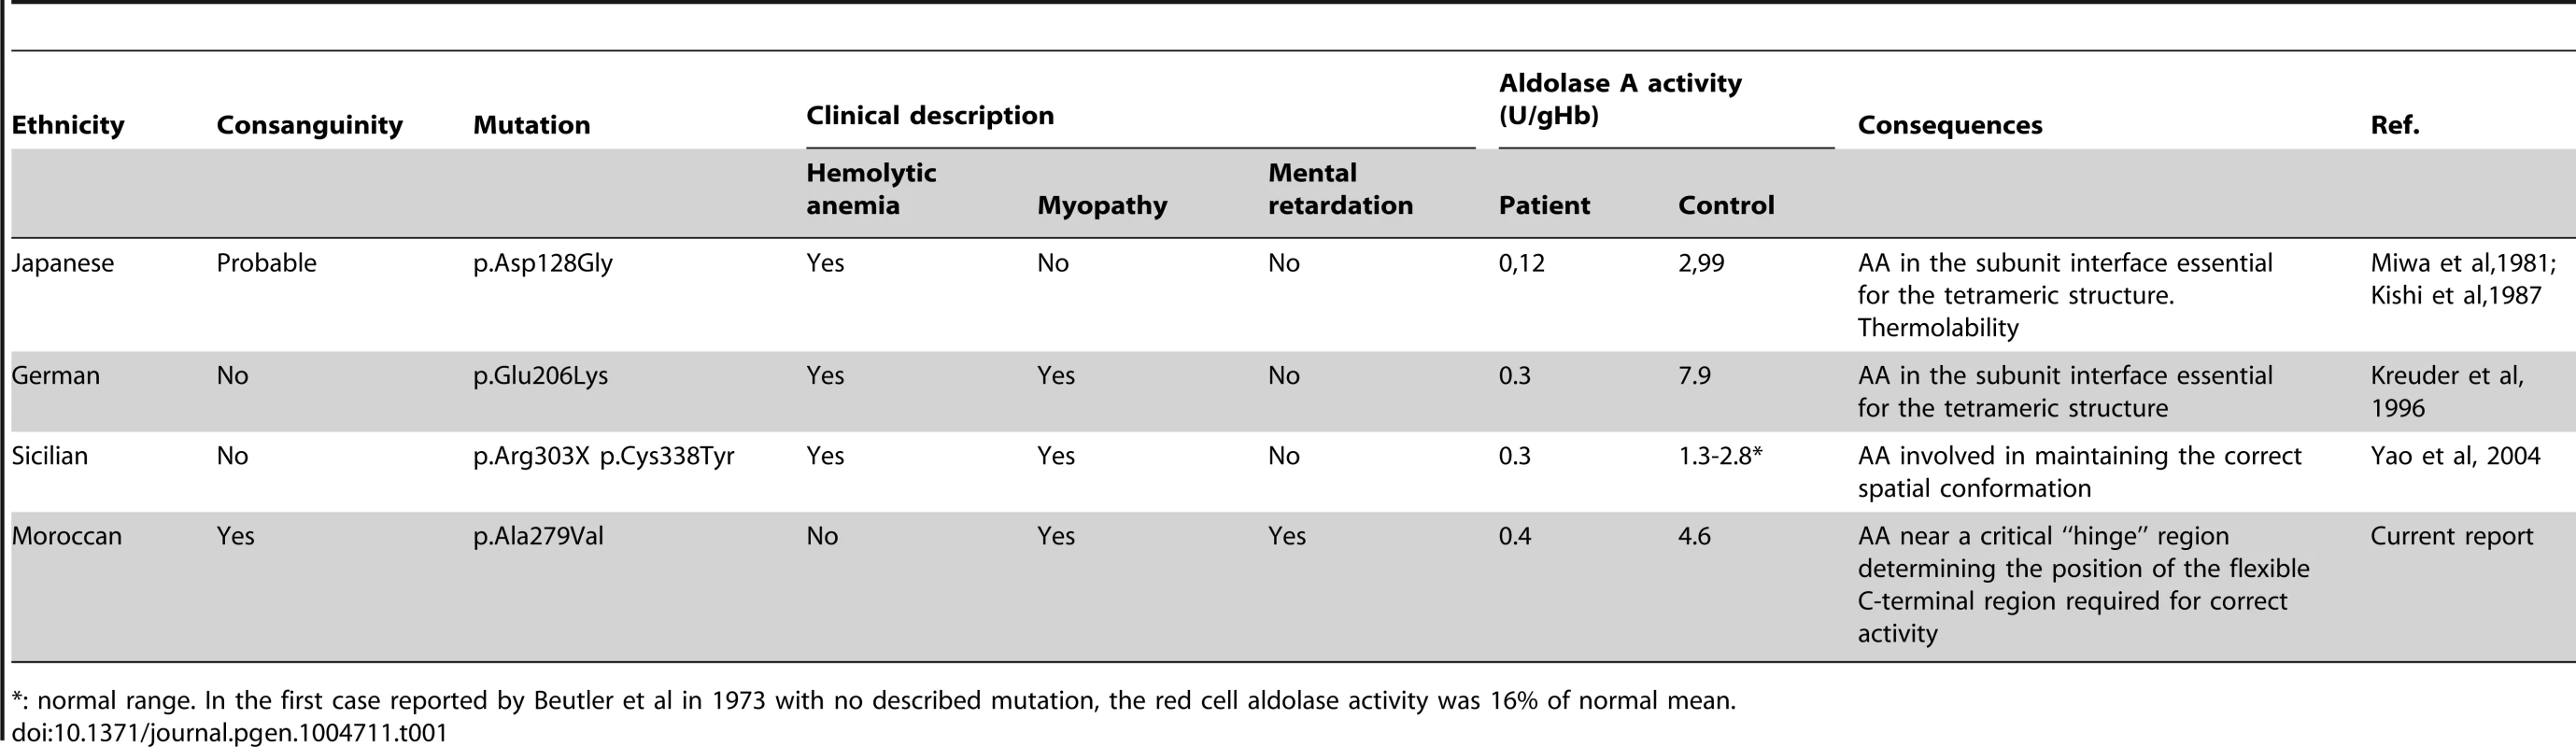 Reported cases of Aldolase A deficiency with the described mutations.